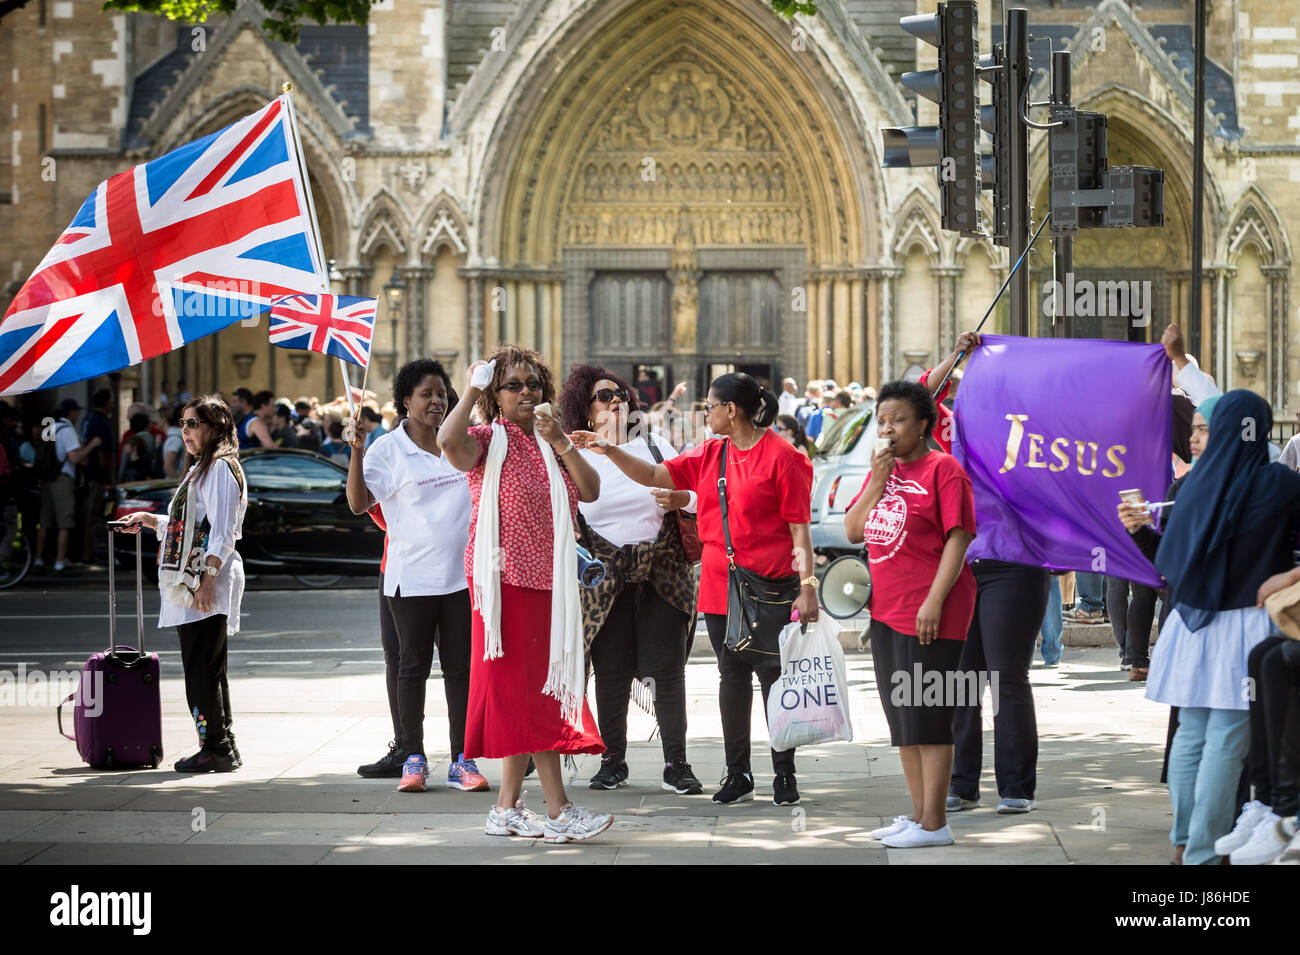 London, UK. 27th May, 2017. Christian movement ‘Wailing Women Worldwide’ rally in Parliament Square Credit: Guy Corbishley/Alamy Live News Stock Photo